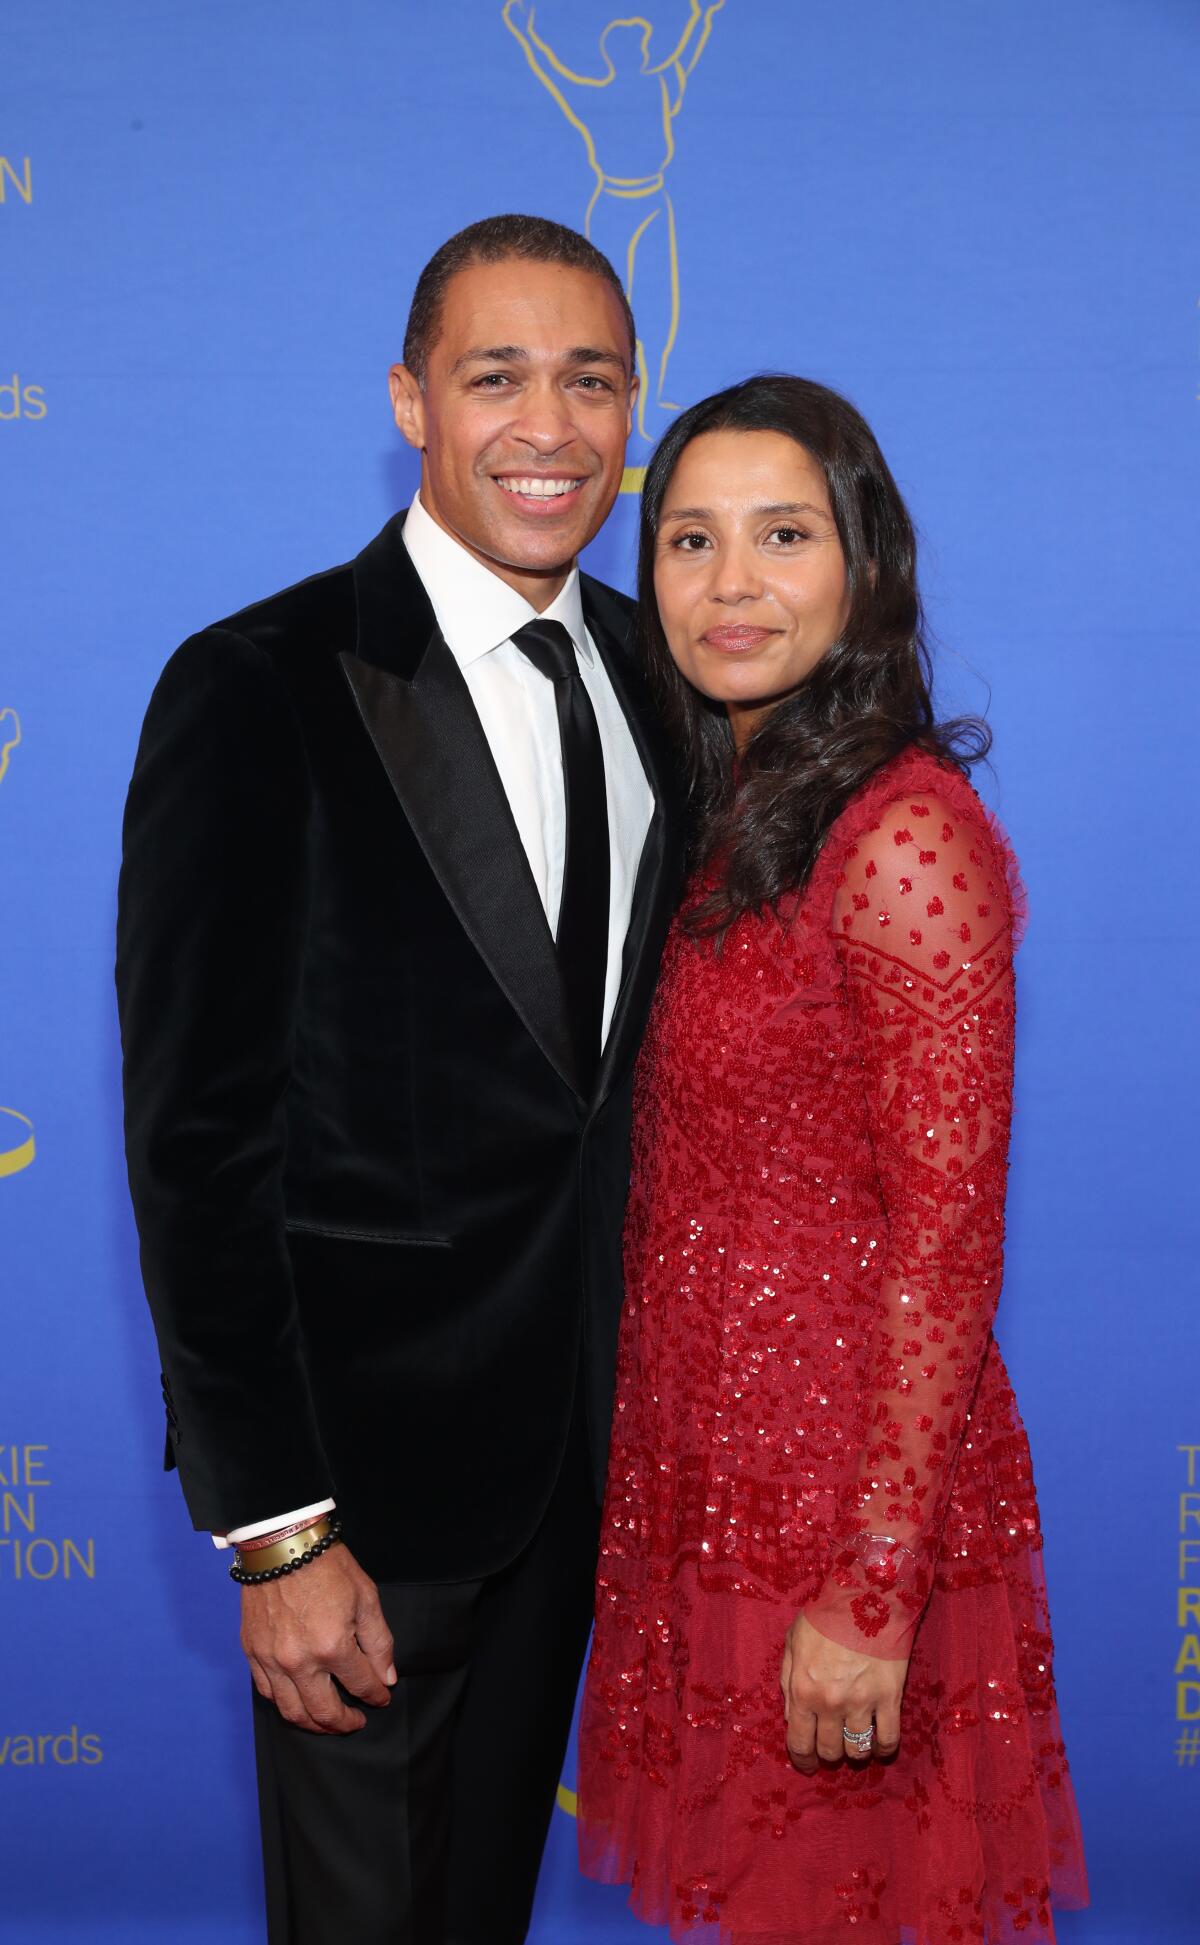 A man in a black suit and a woman in a red dress stand close together.